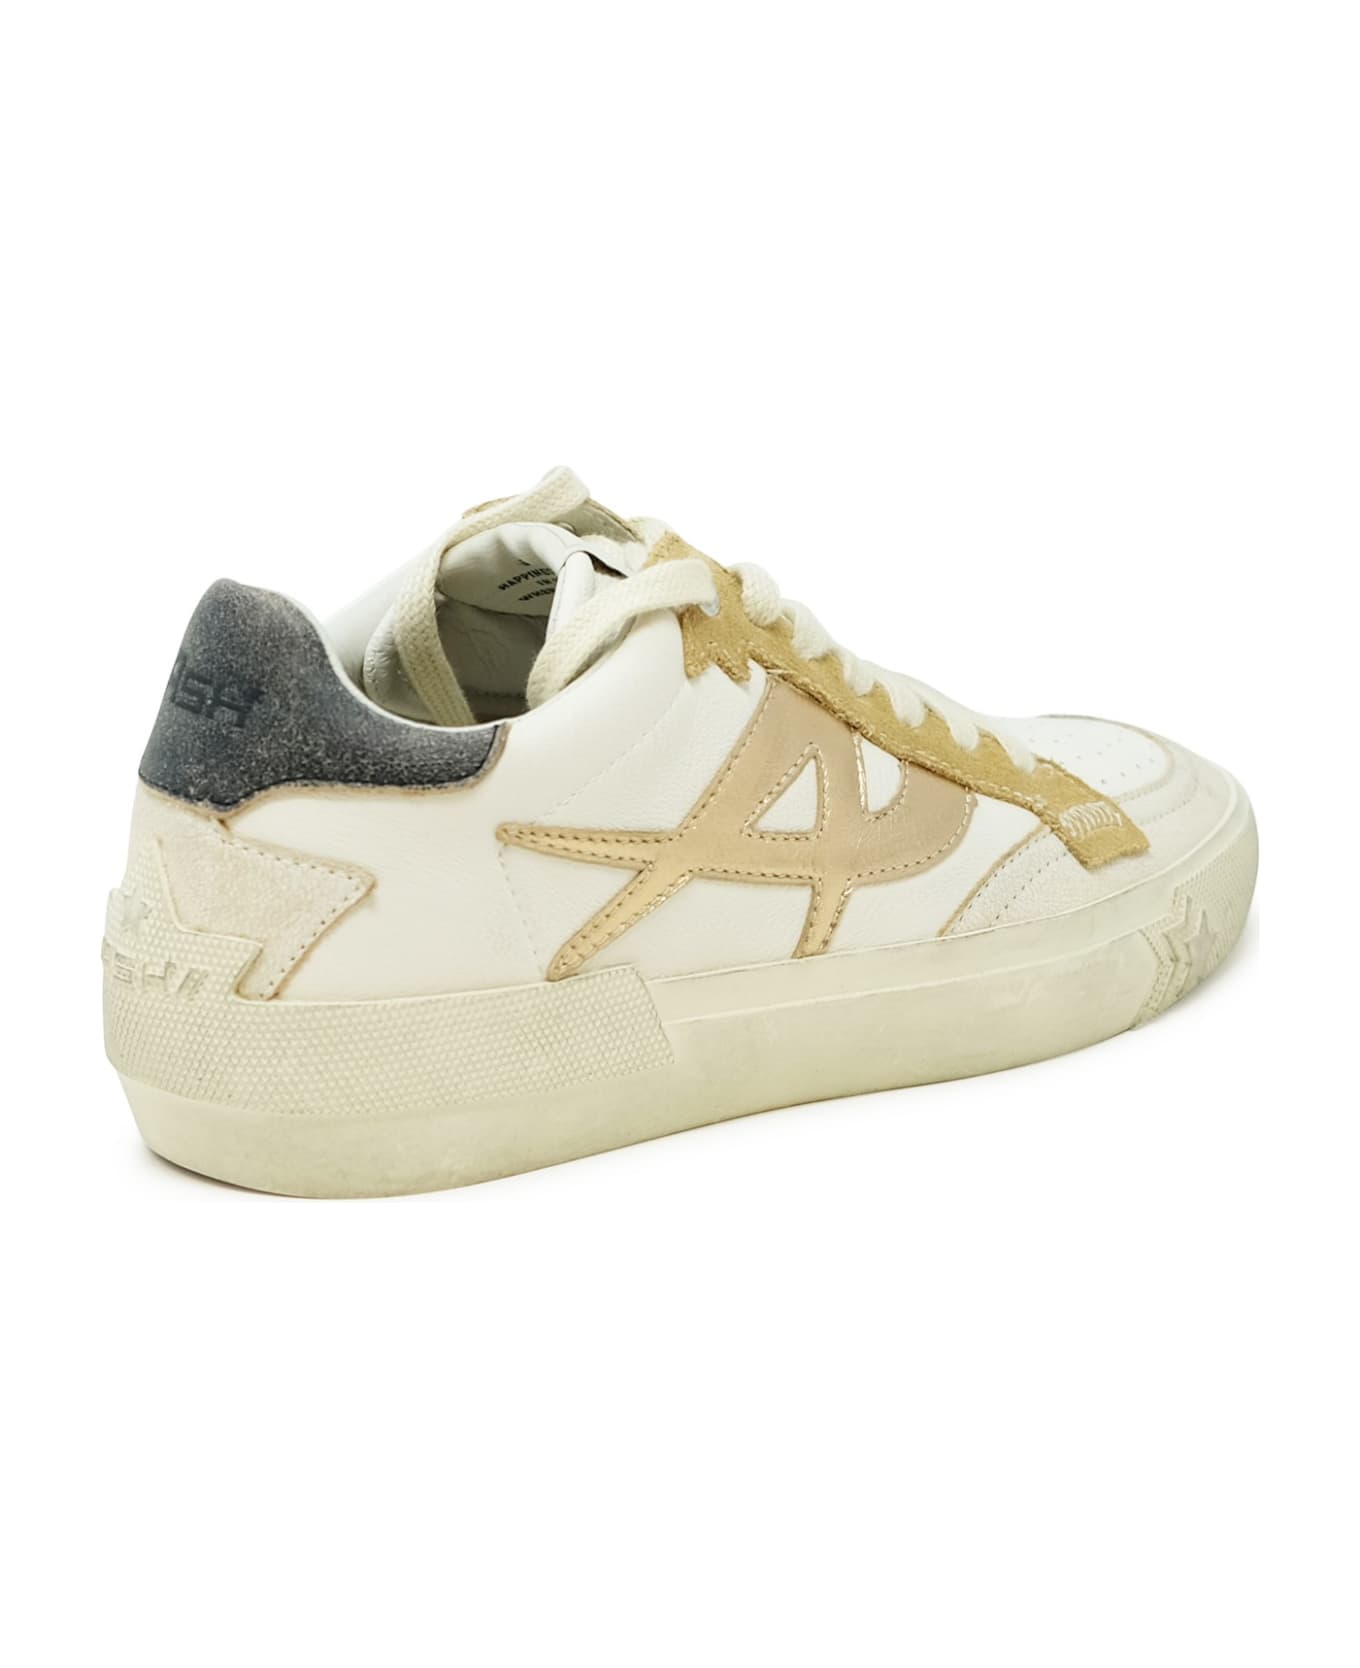 Ash Beige/white Leather Sneakers - WHITE/BEIGE